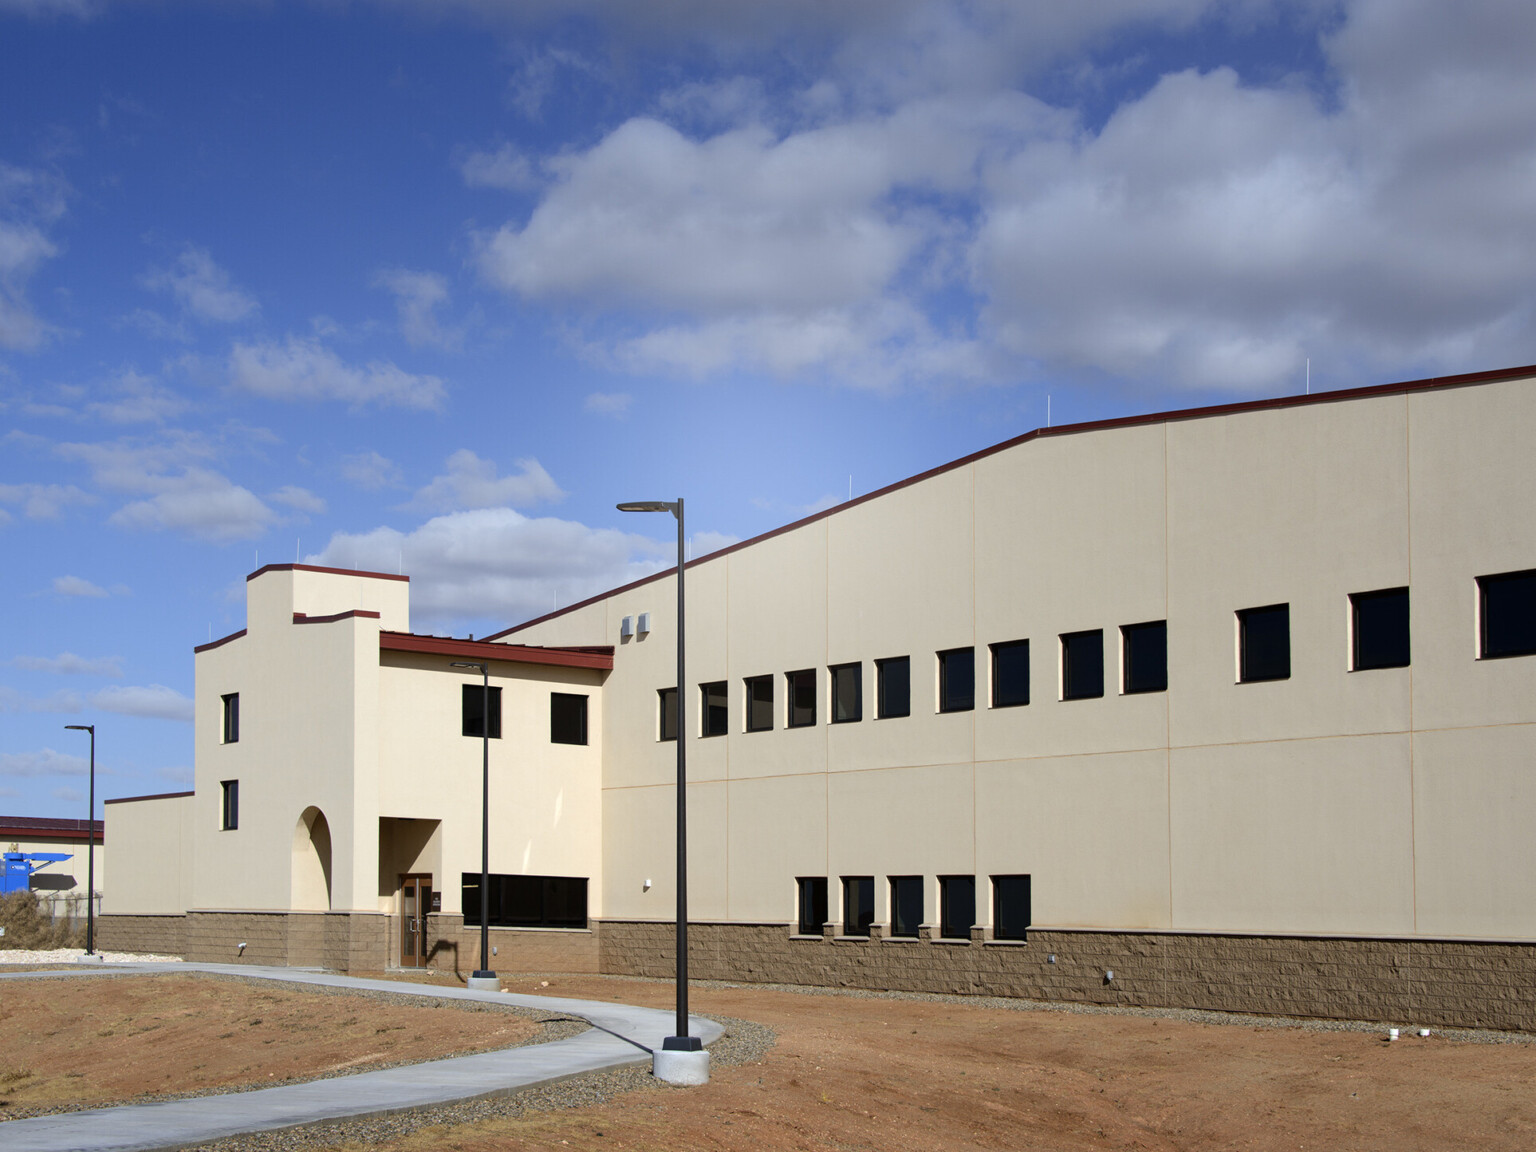 The Cannon Air Force Base Squadron Operations Facility uses mission-style architecture to meld seamlessly with the surrounding high plains of eastern New Mexico, outdoor lighting, common walkway